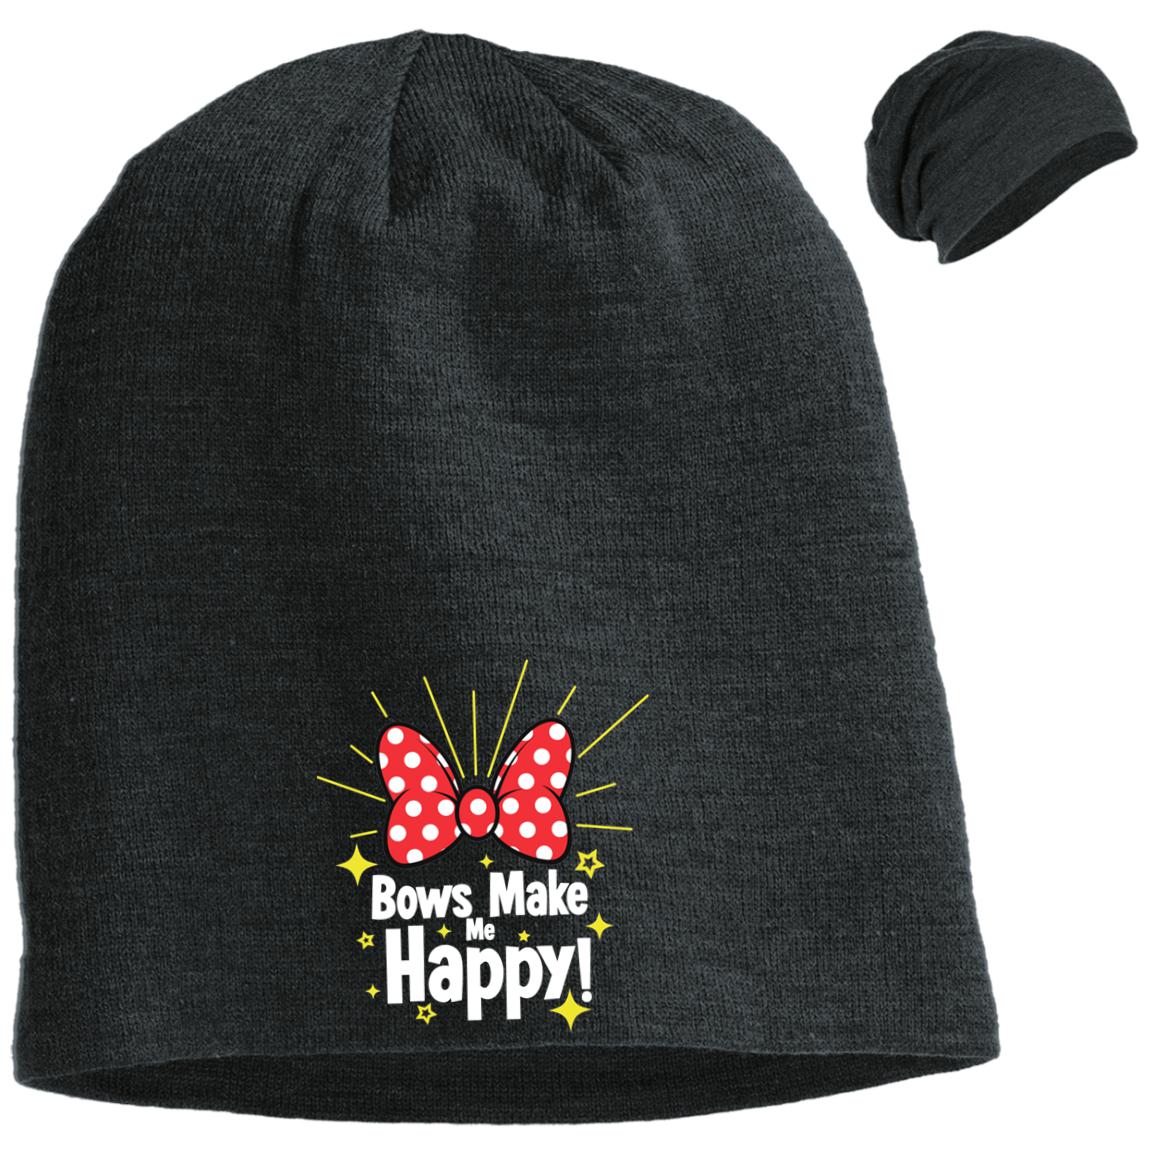 Bows Make Me Happy - Embroidered District Slouch Beanie